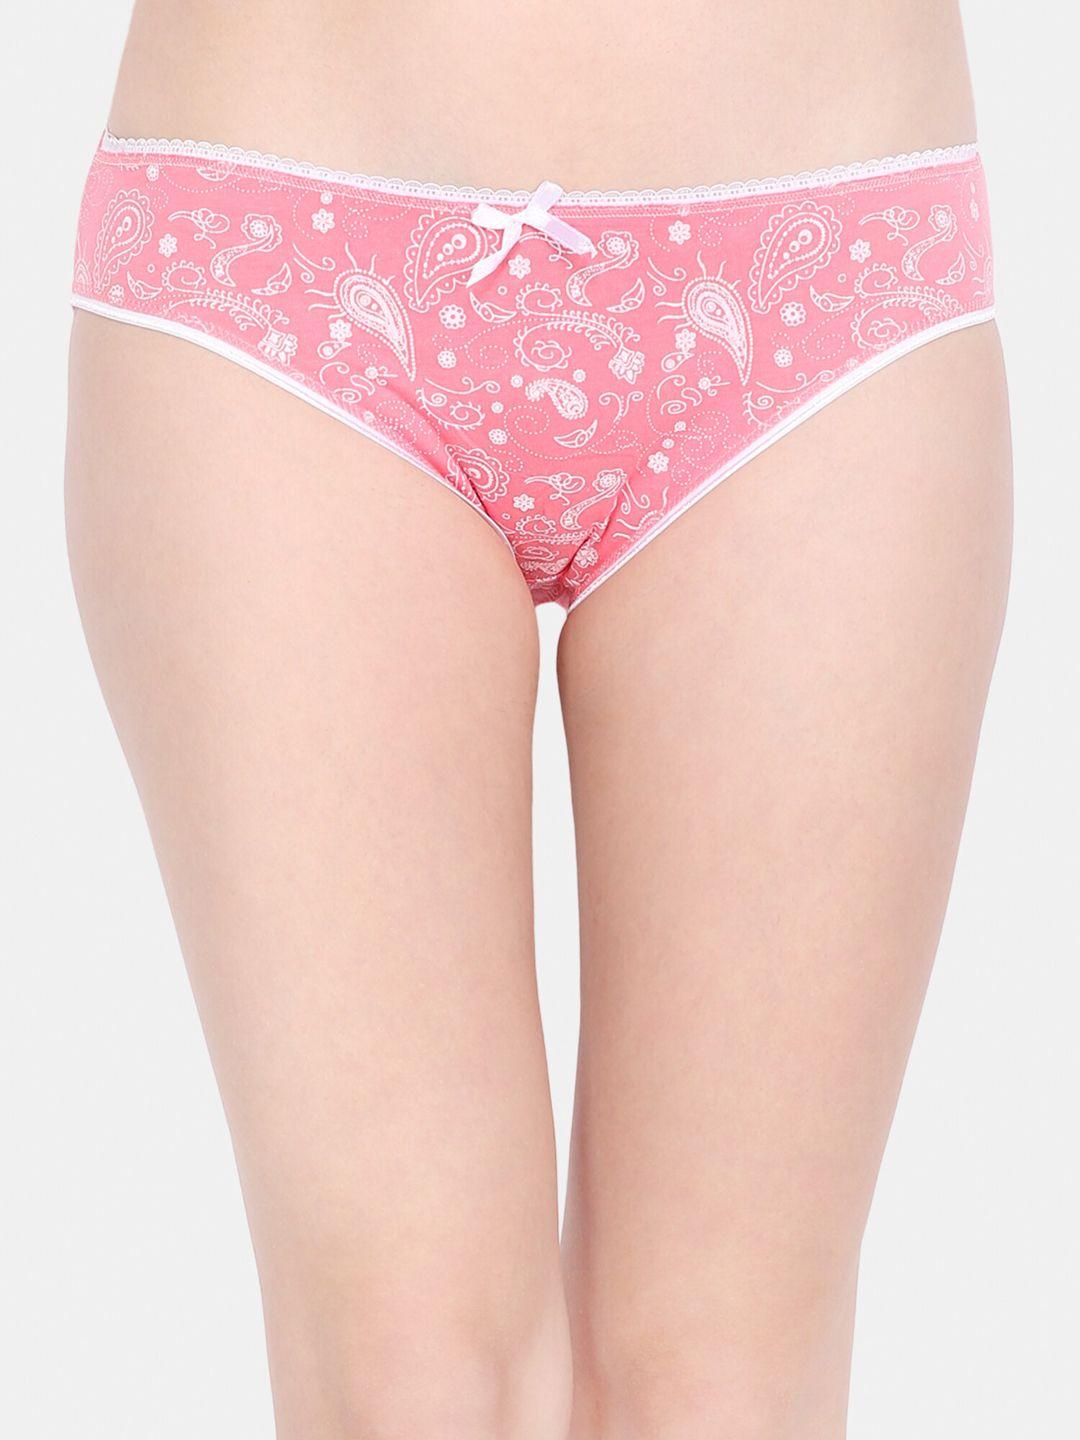 ms.lingies women pink & white printed hipster brief z12-89176s